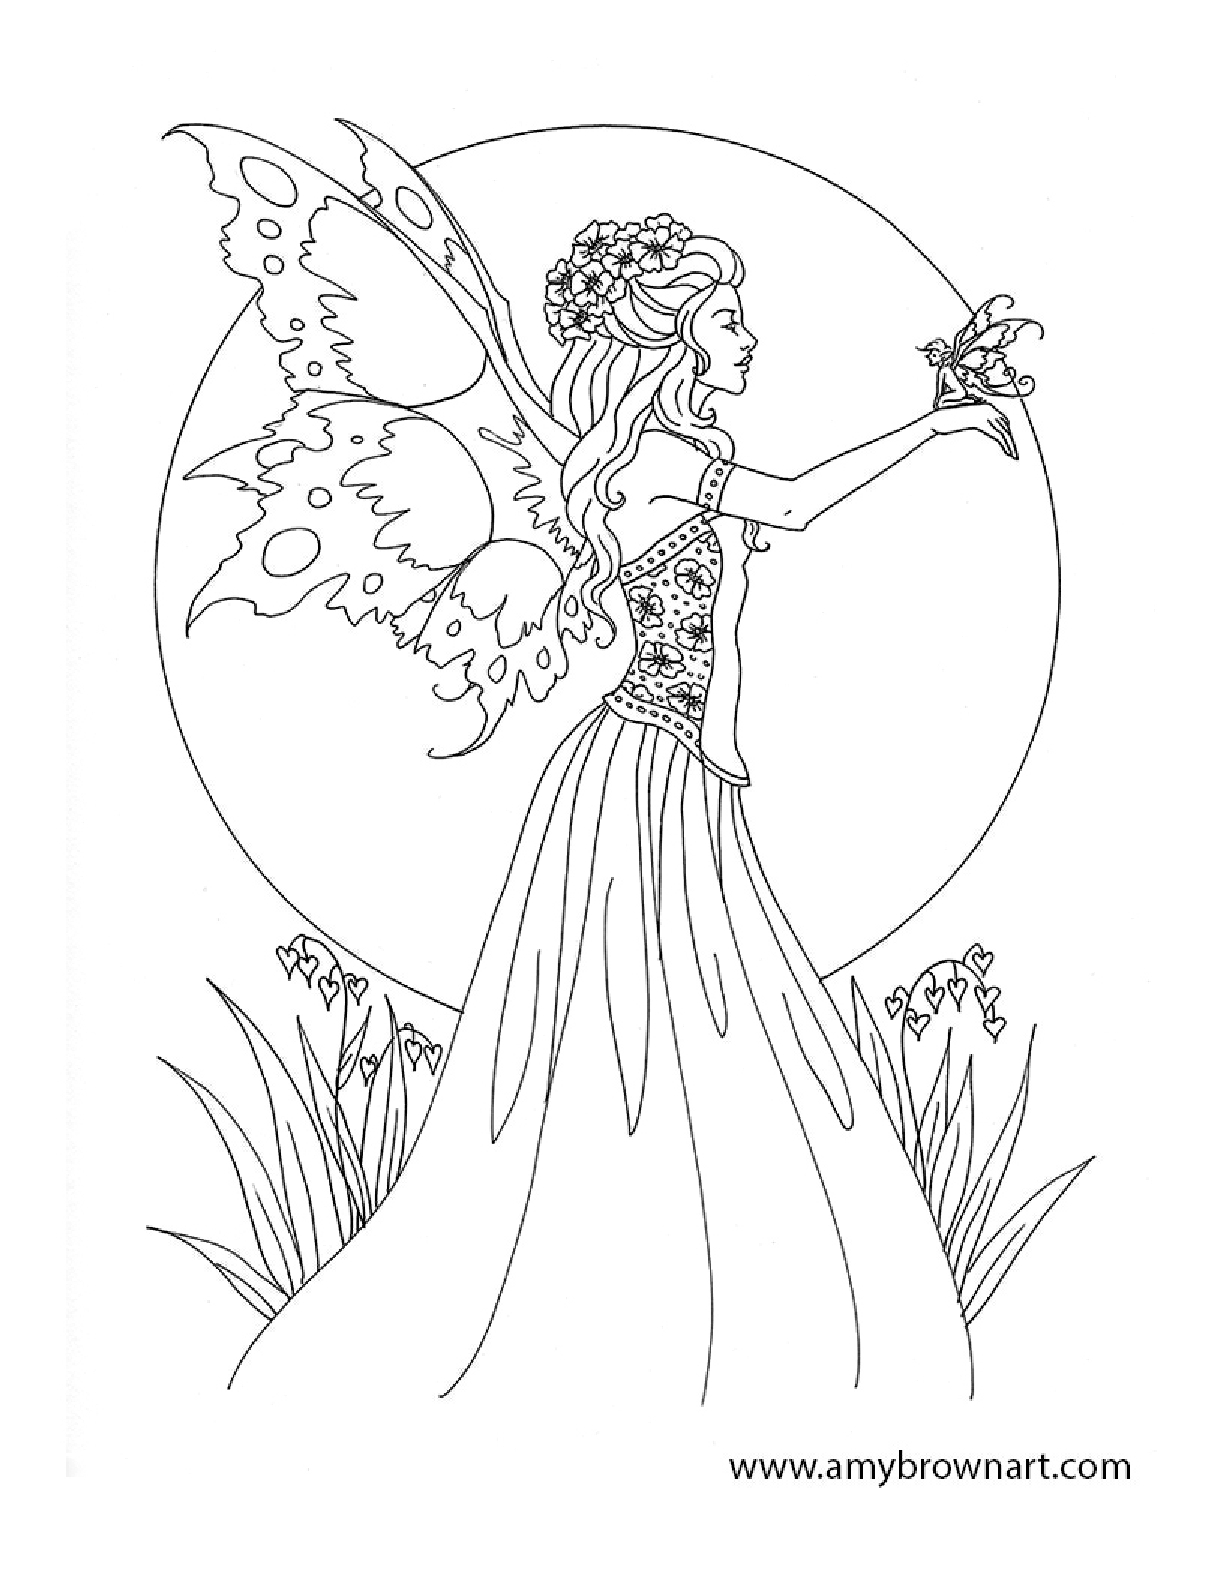 Free Amy Brown Fairy Coloring Pages | Fairie And Elf Coloring Pages - Free Printable Coloring Pages For Adults Dark Fairies